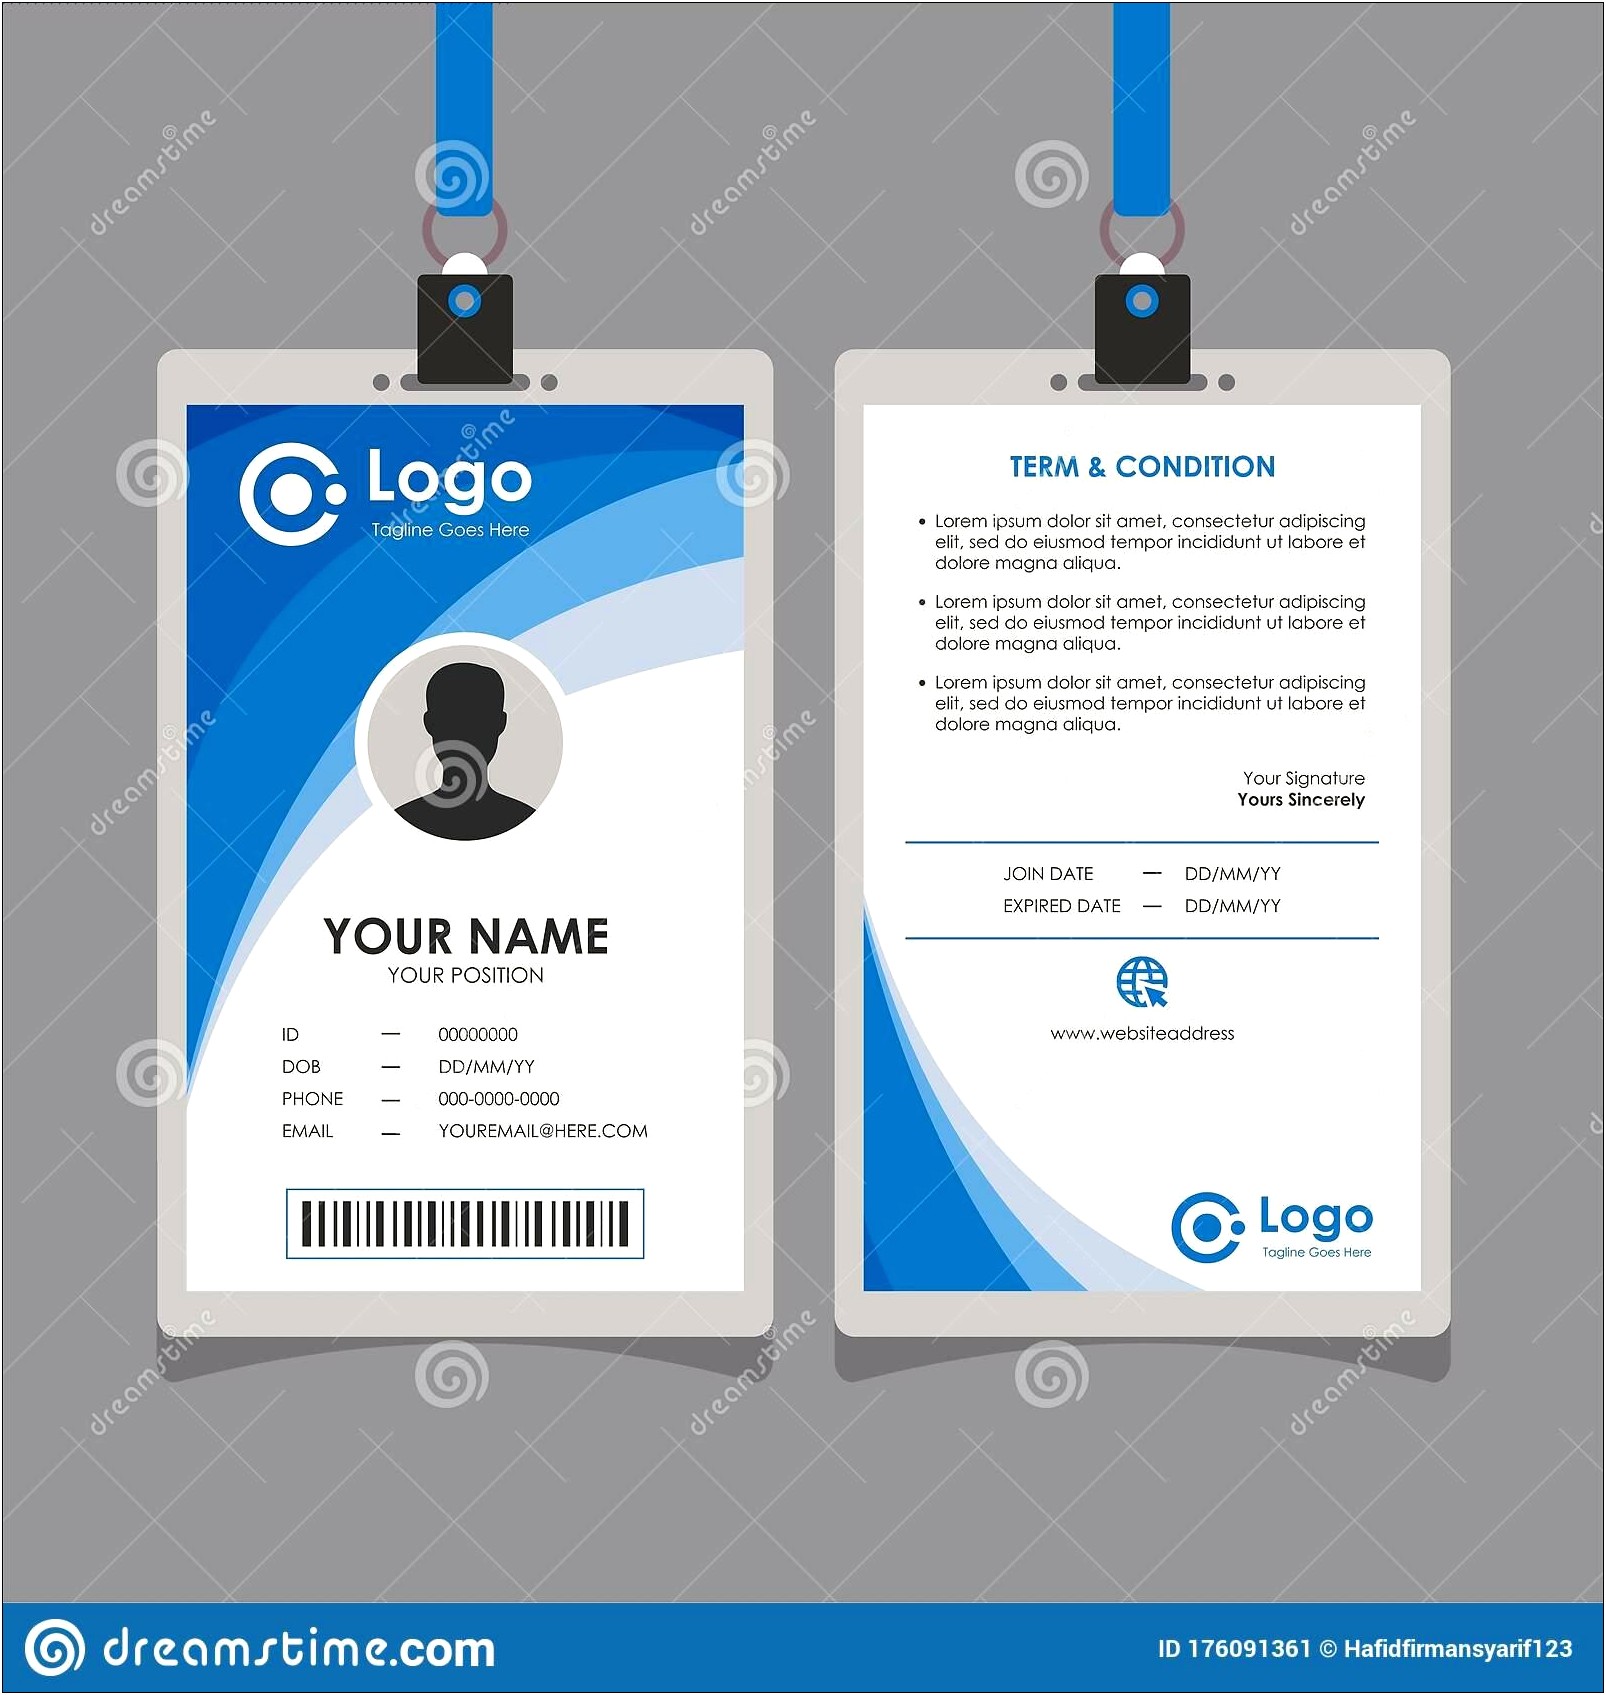 Wave Business Card Template Free Word Download